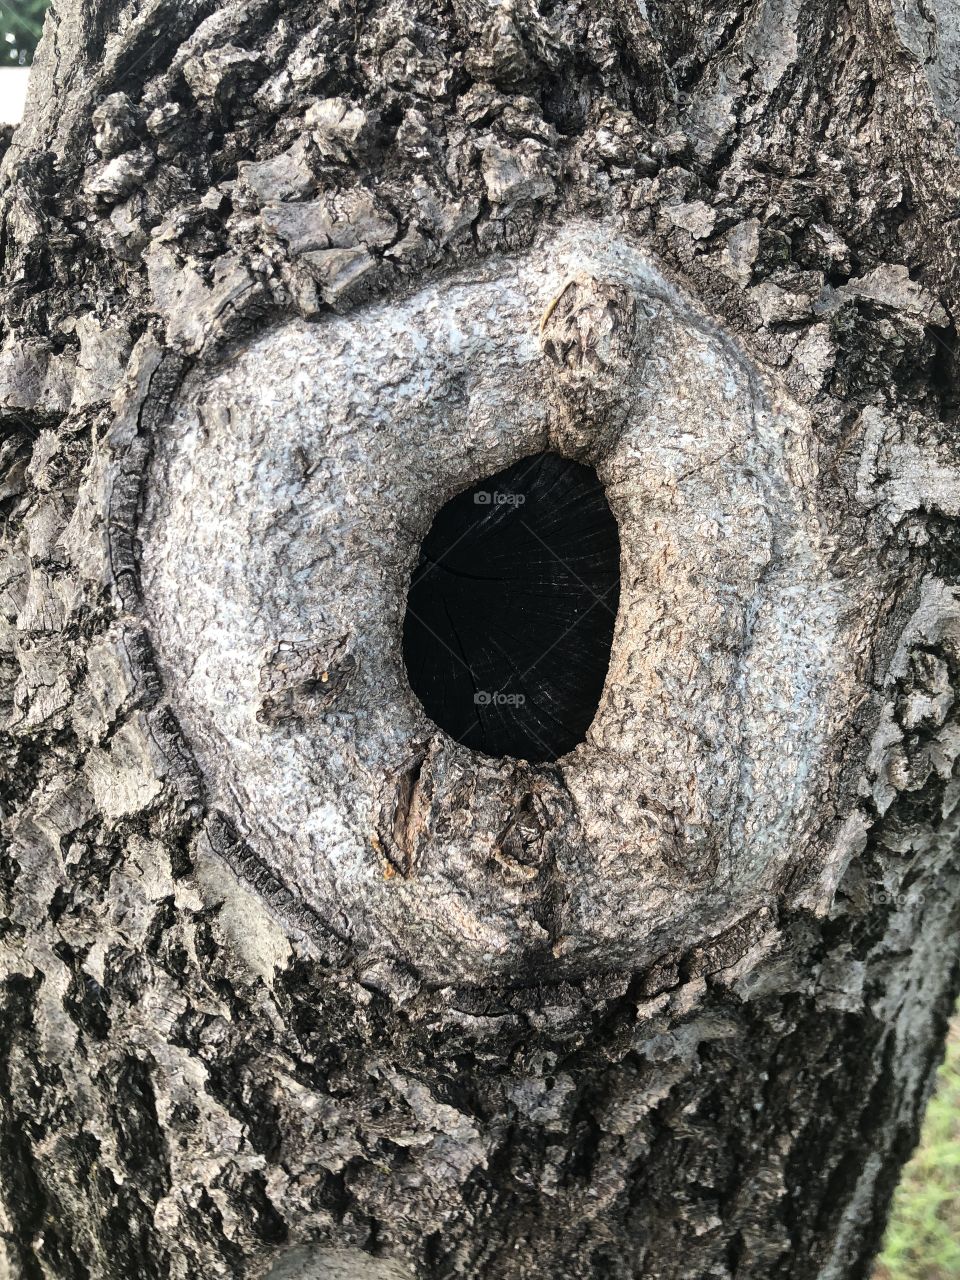 Knothole in an old tree on OU campus